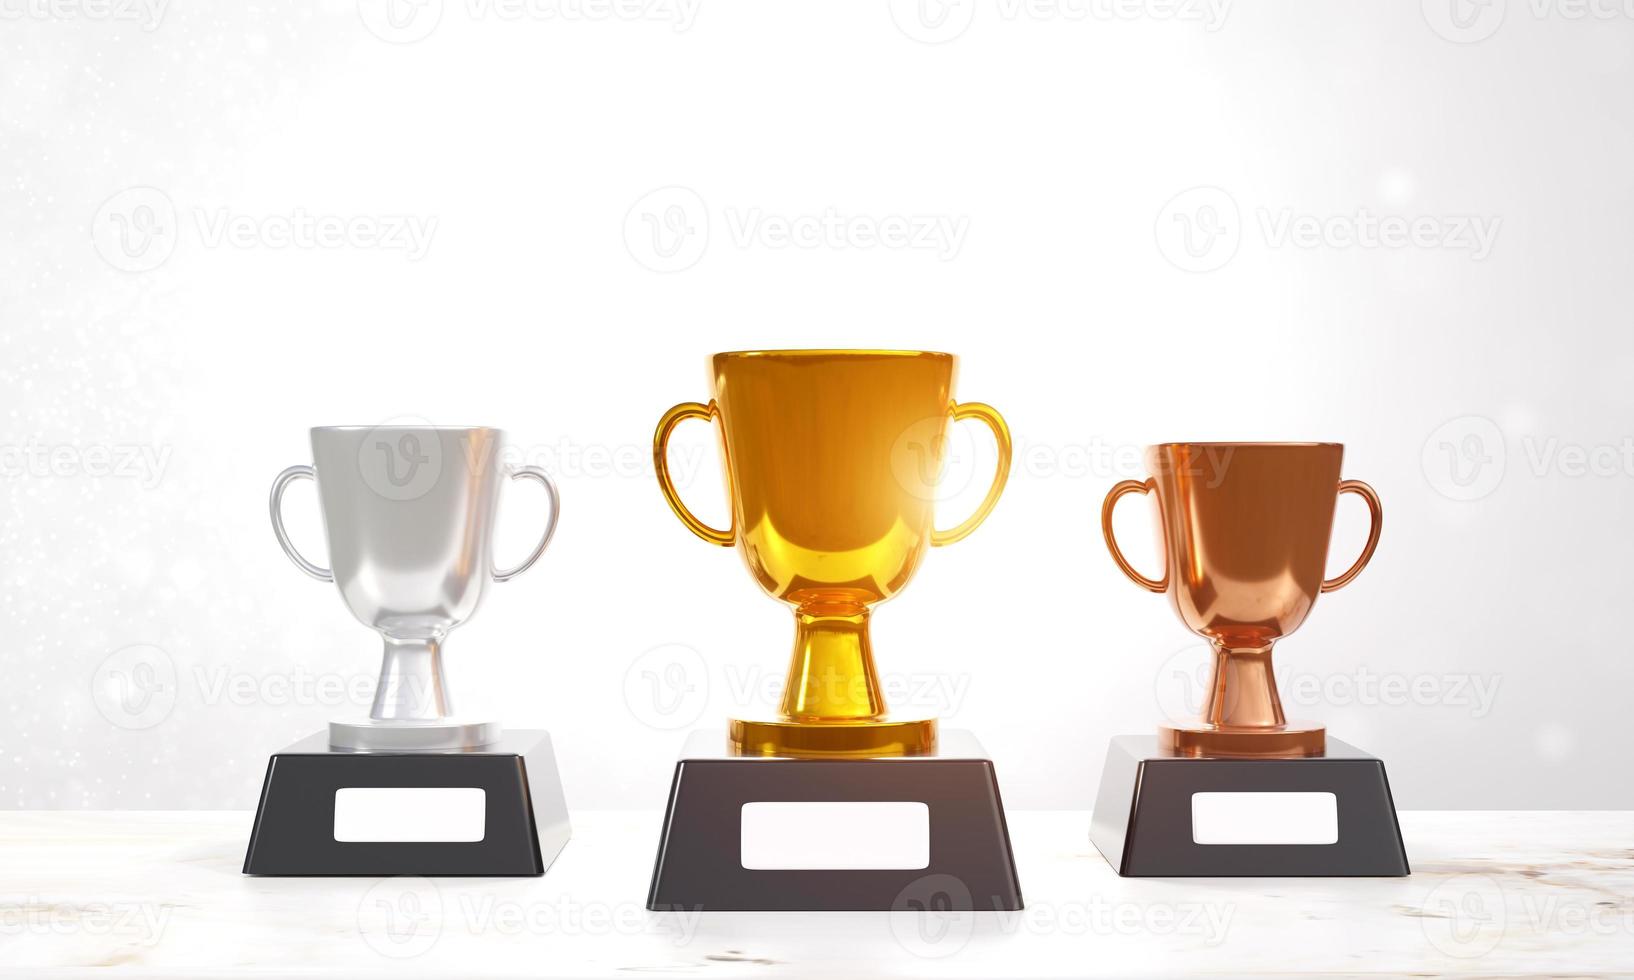 Trophies for winners. Set of gold, silver, and bronze trophies on white background. Winner concept, award design, achievement, 1st, 2nd, 3rd place. 3D rendering illustration photo